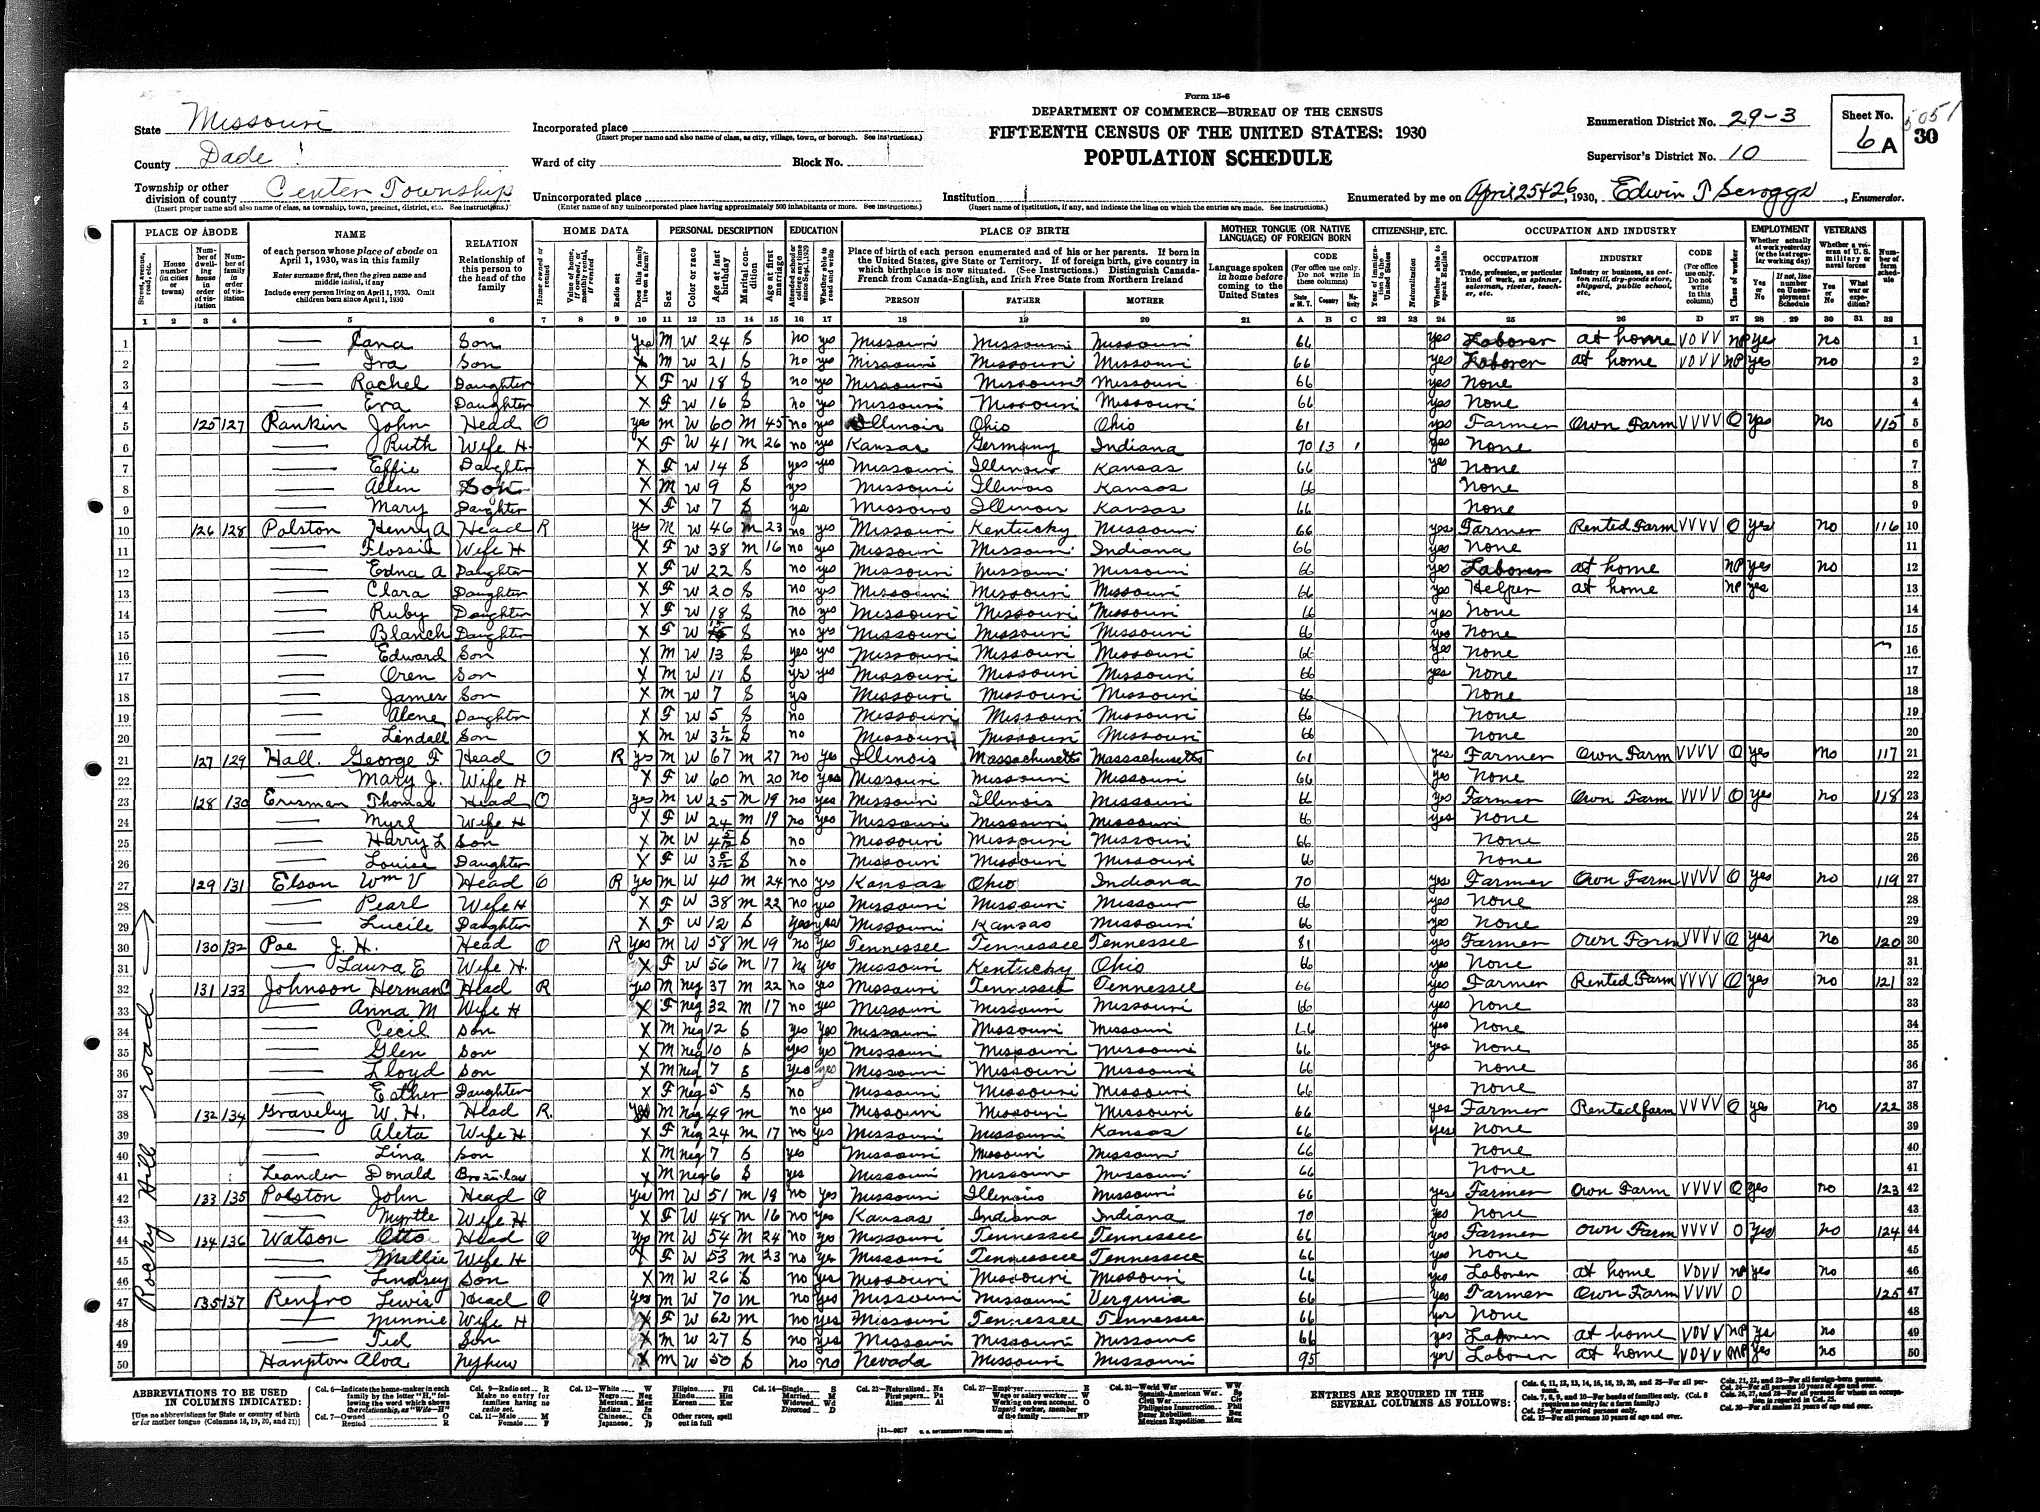 Henry Arthur and Flossie Lee (Lasater) Polston, 1930 Dade County, Missouri, census